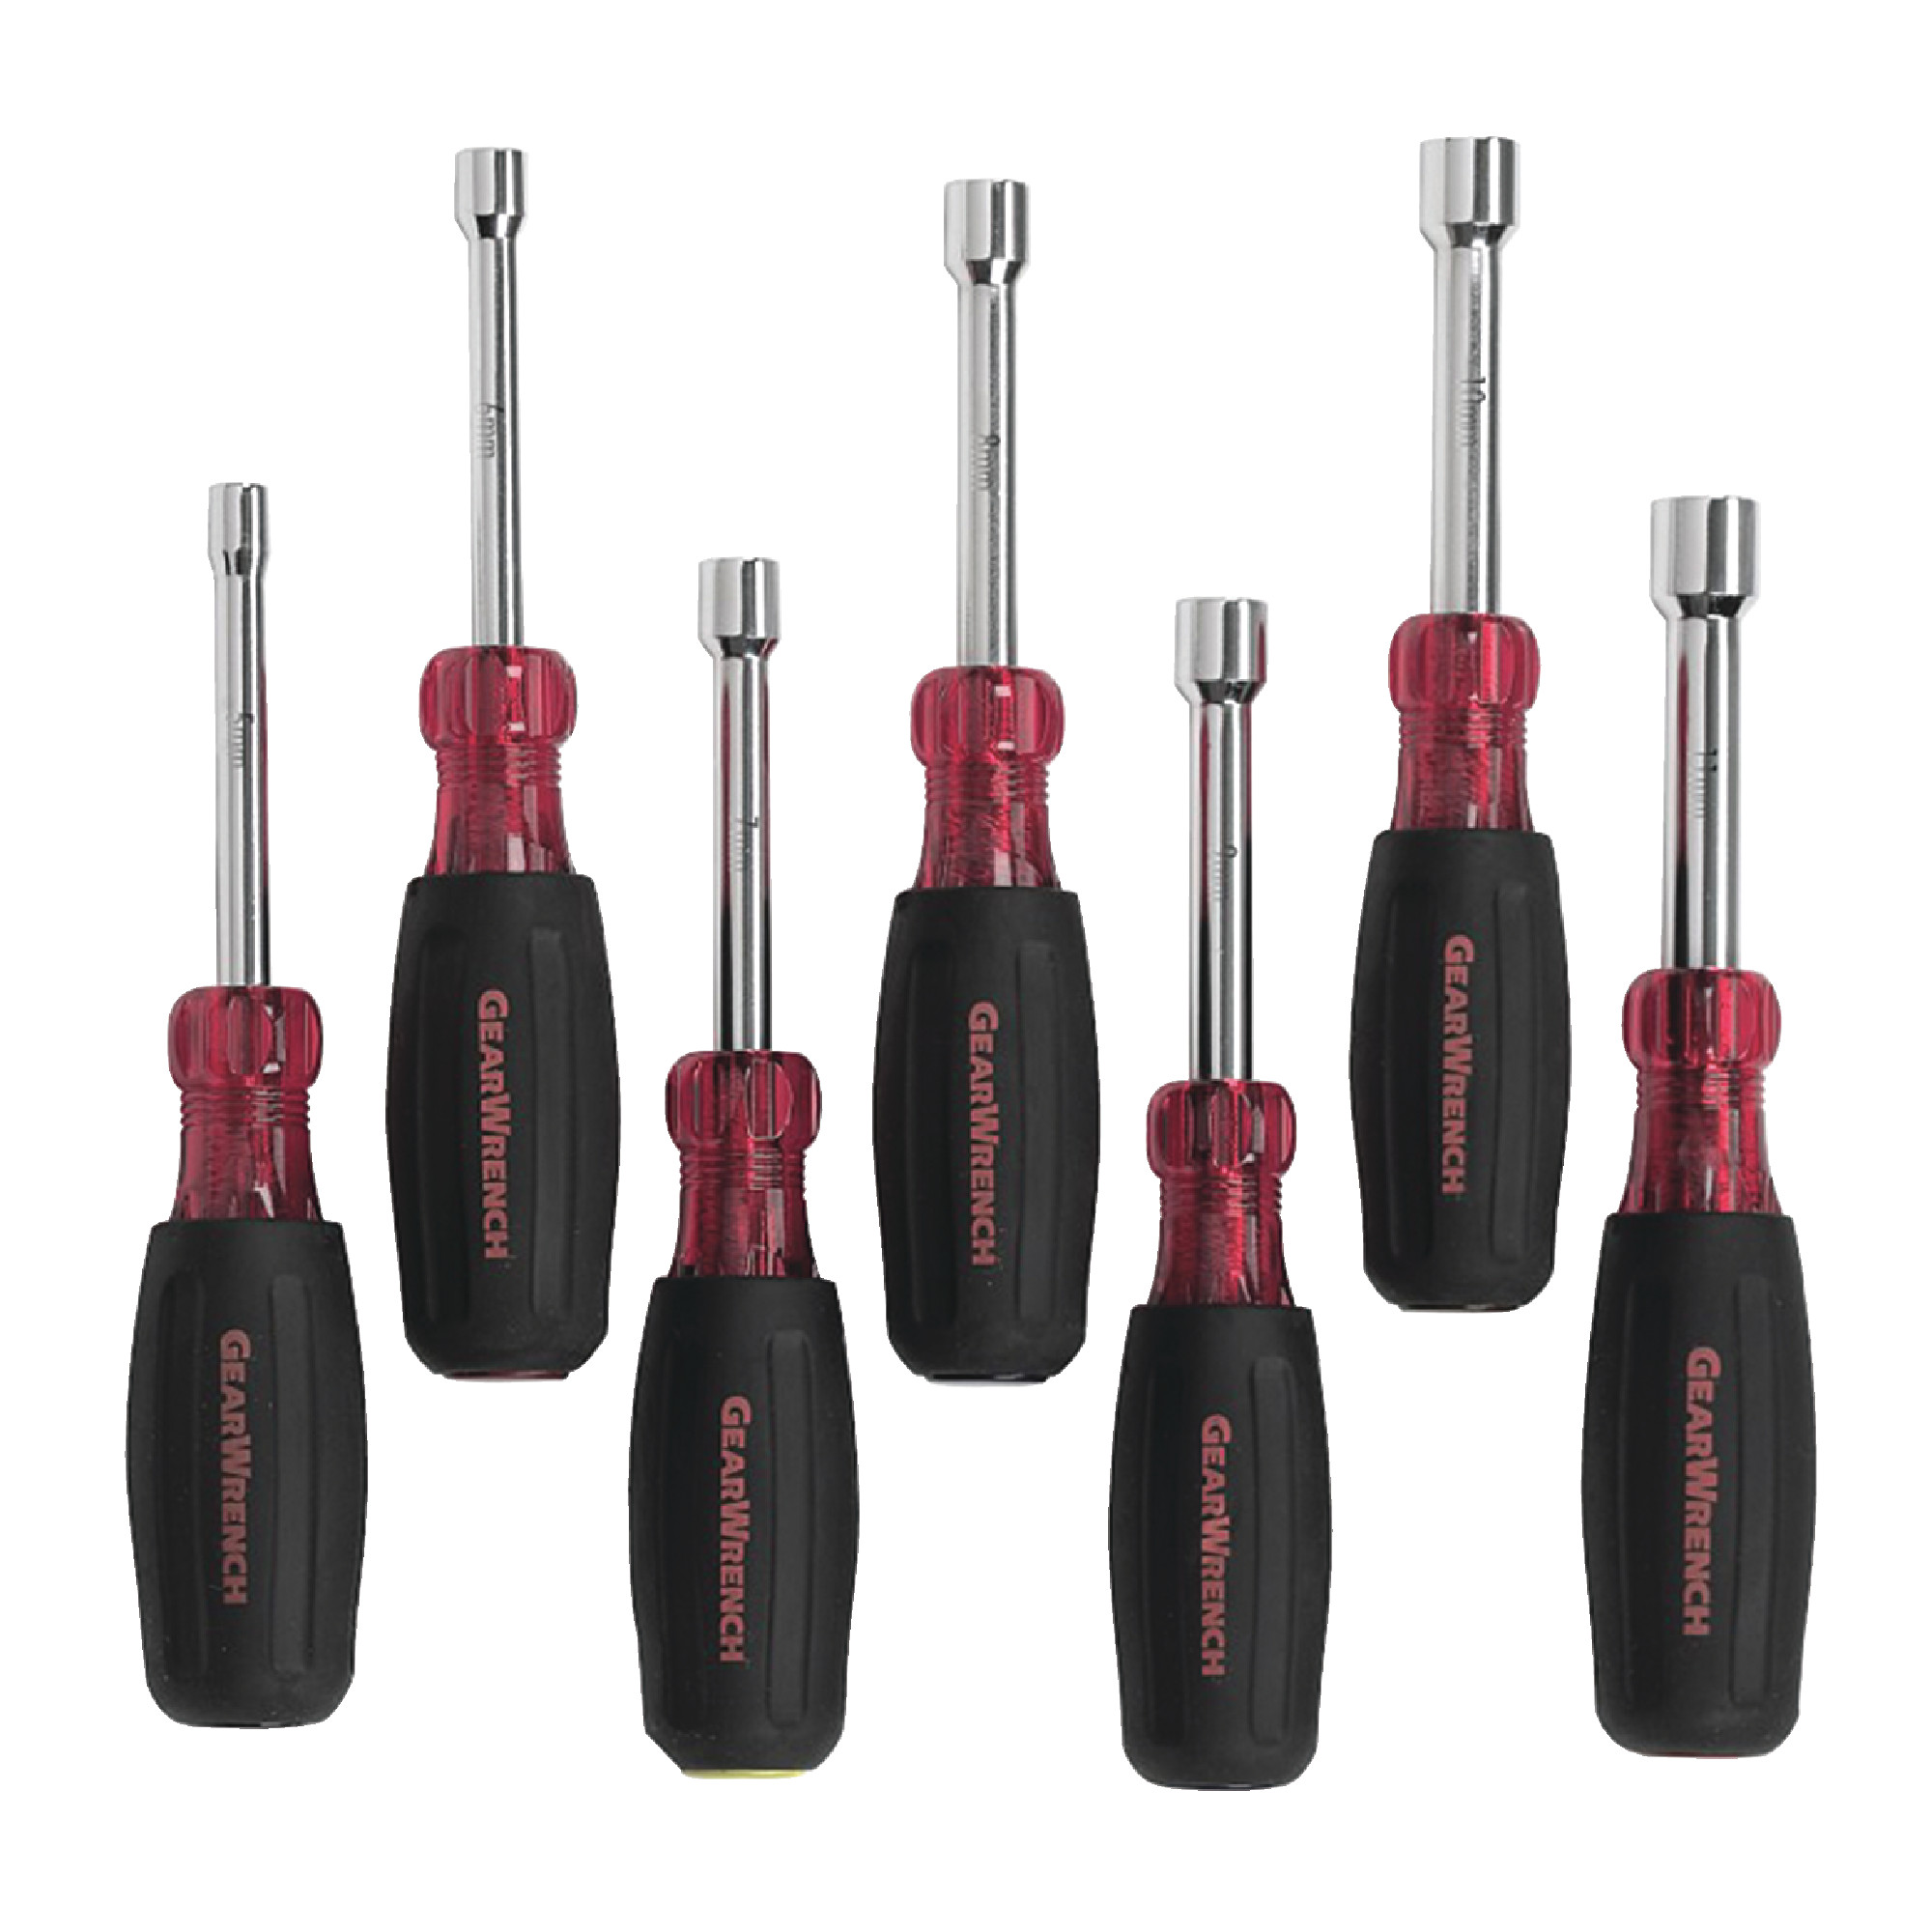 7 Piece 6 to 12mm Hollow Shaft Nut Driver Set - Model: 82764